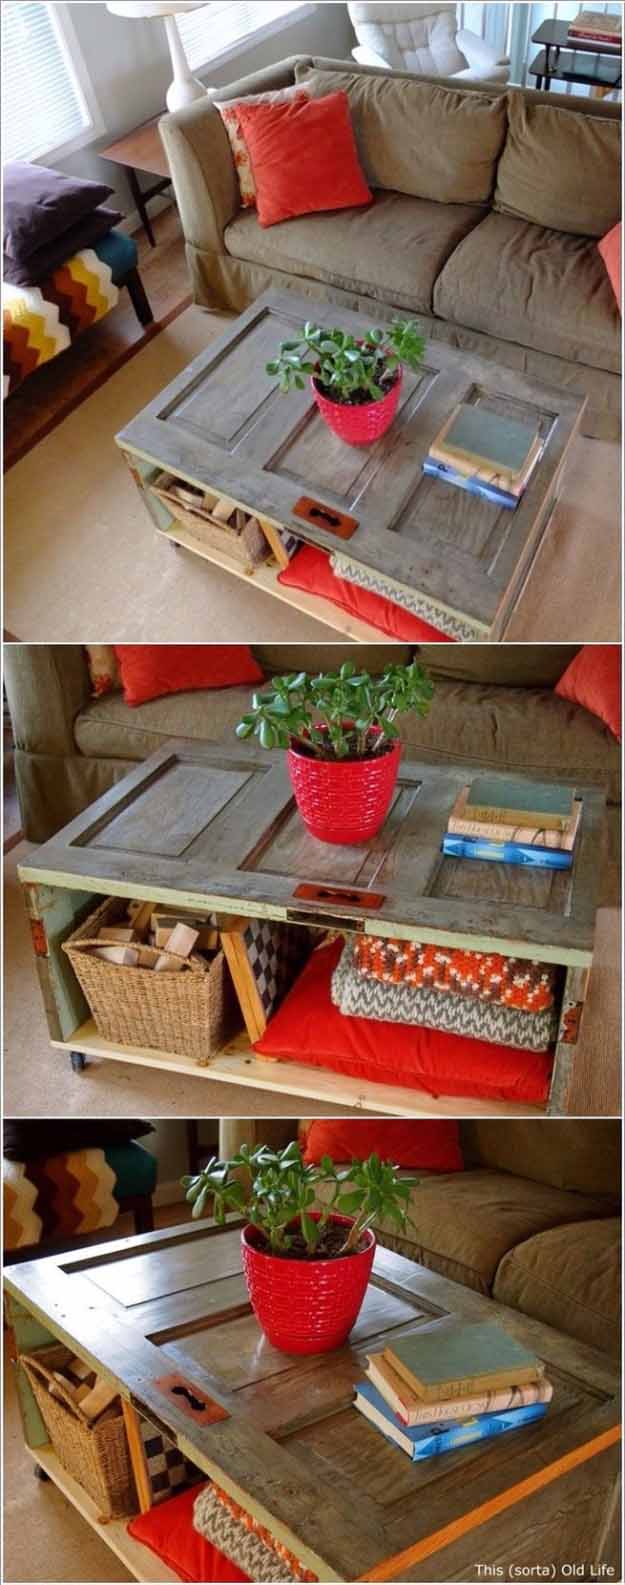 DIY Repurposed Furniture Projects | Easy Upcycling Ideas for the Home | DIY Coffee Table with Storage | DIY Projects and Crafts by DIY JOY #coffeetables #diyfurniture